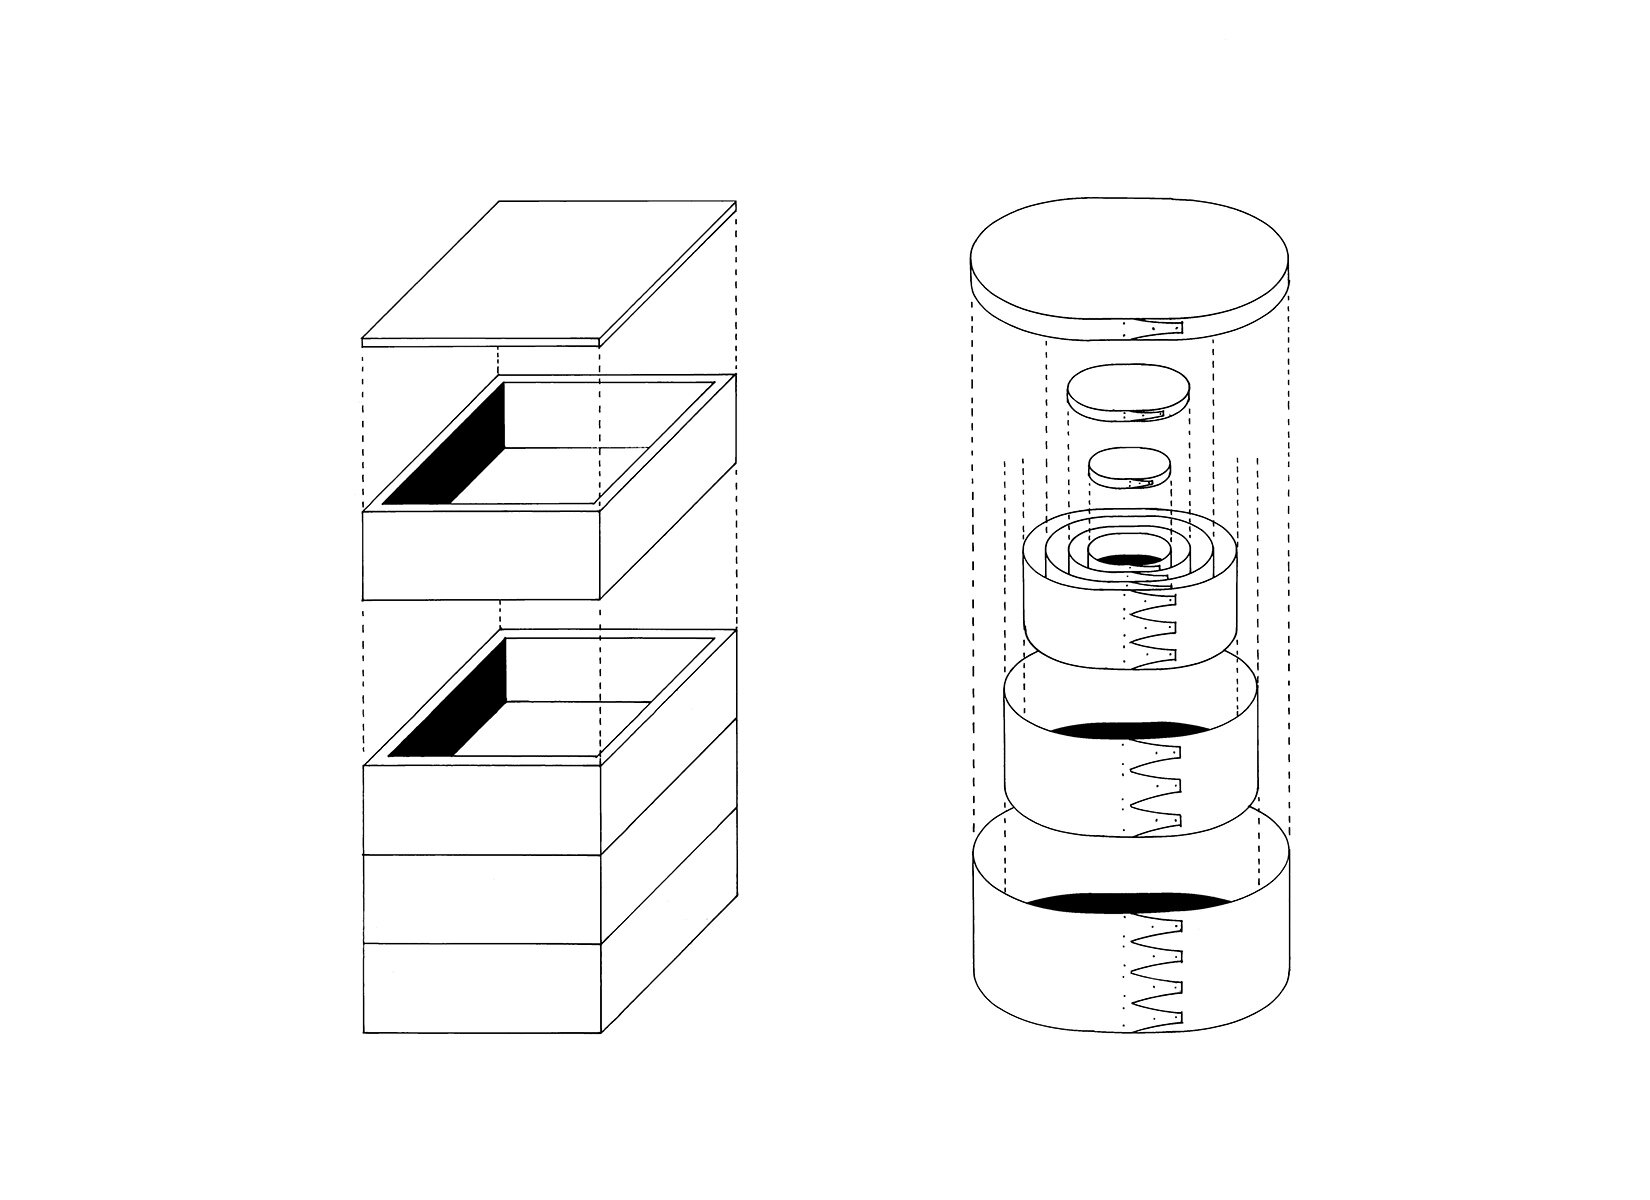  Diagram of Boxes: Methods of opening generate different spaces. 